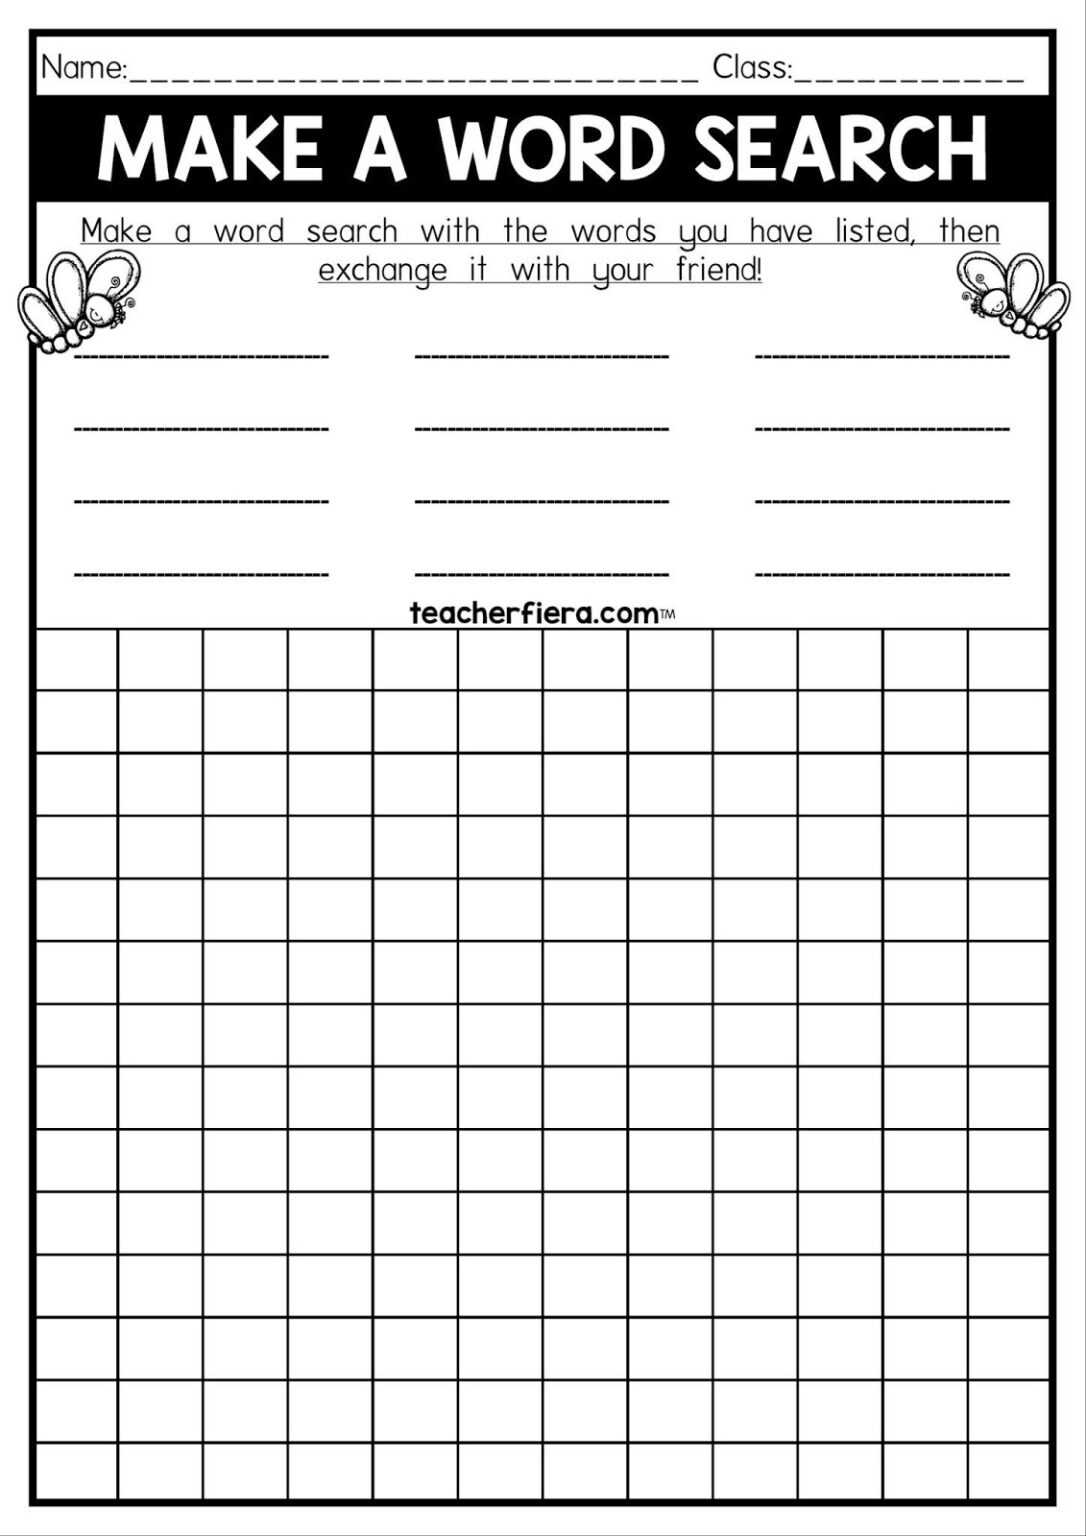 teacherfiera-make-a-word-search-in-word-sleuth-template-professional